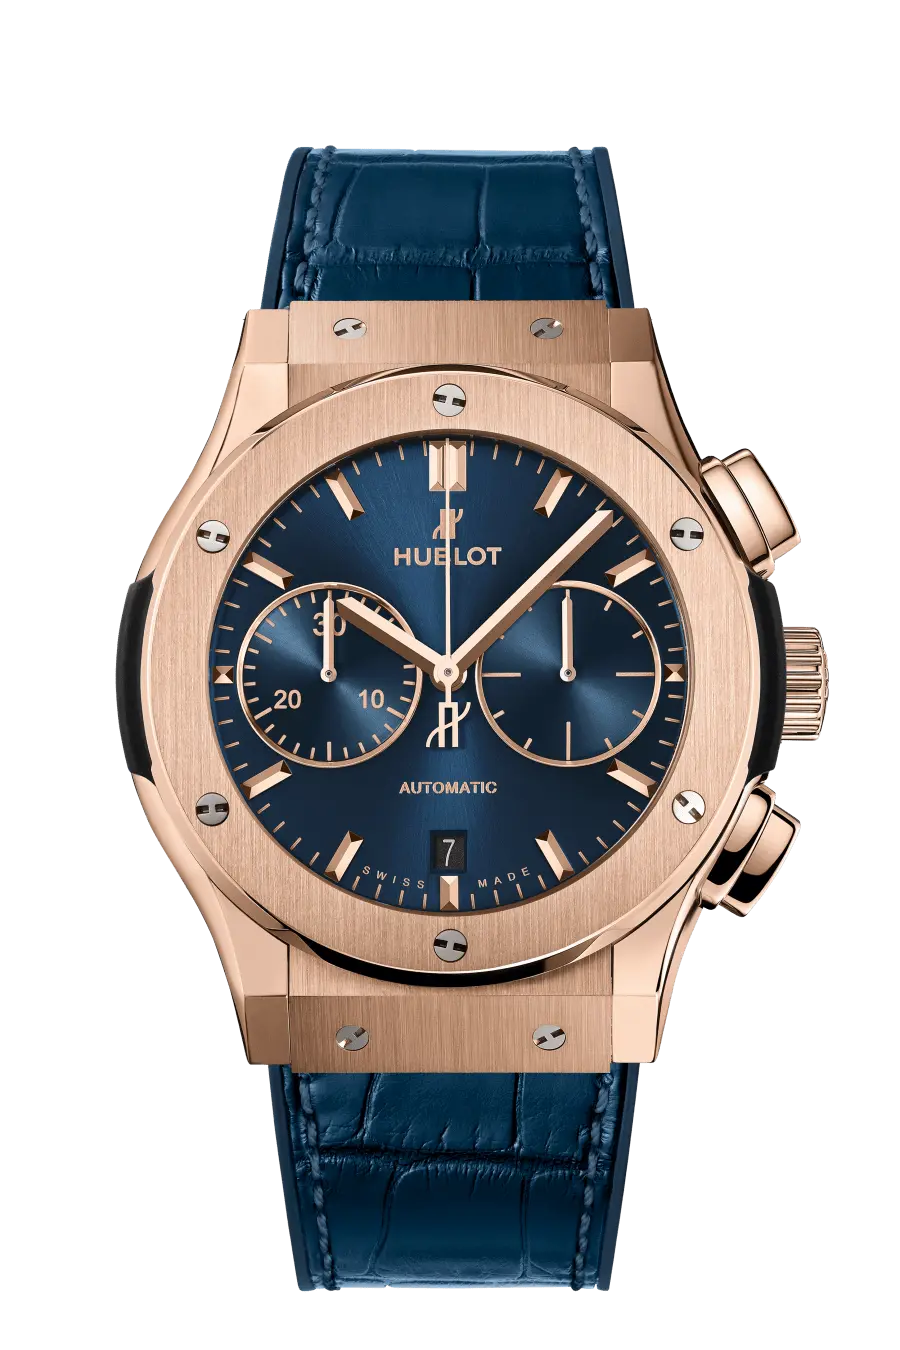 Classic Fusion Chronograph king Gold Blue Wrist Watch by Hublot